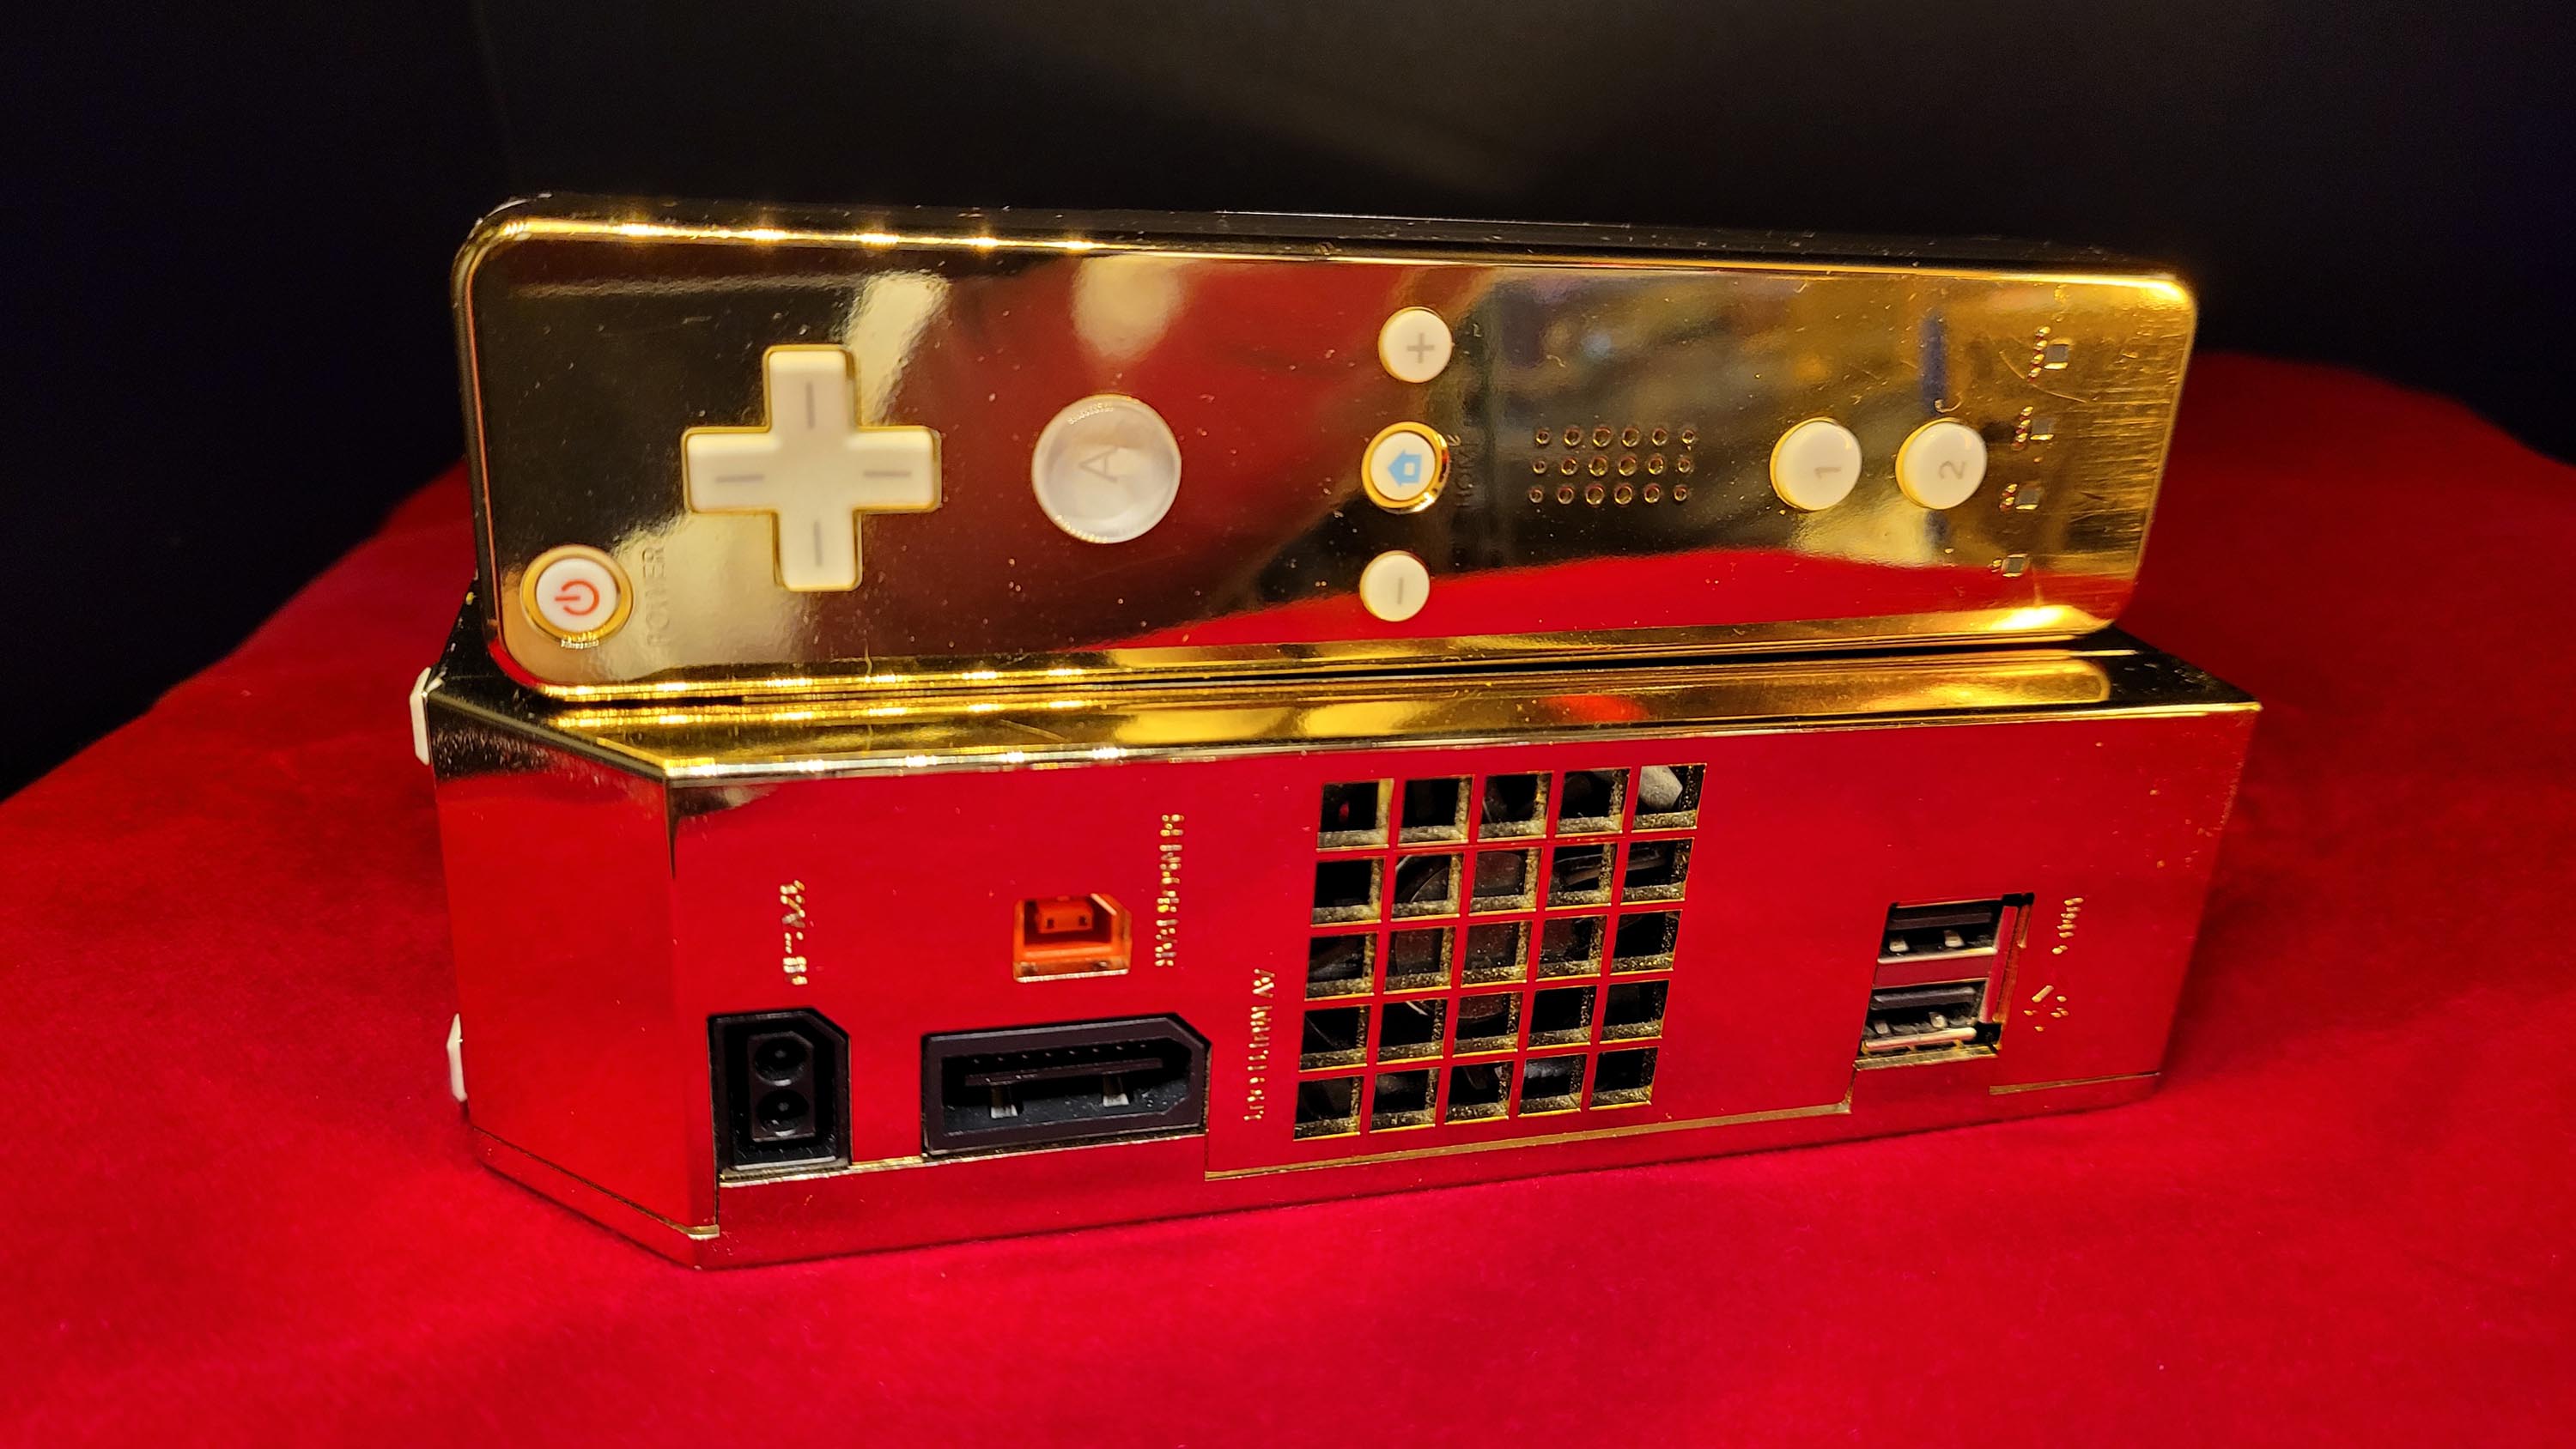 resterend hoed Symfonie Gold-plated Nintendo Wii made for Queen Elizabeth up for sale - CNN Style